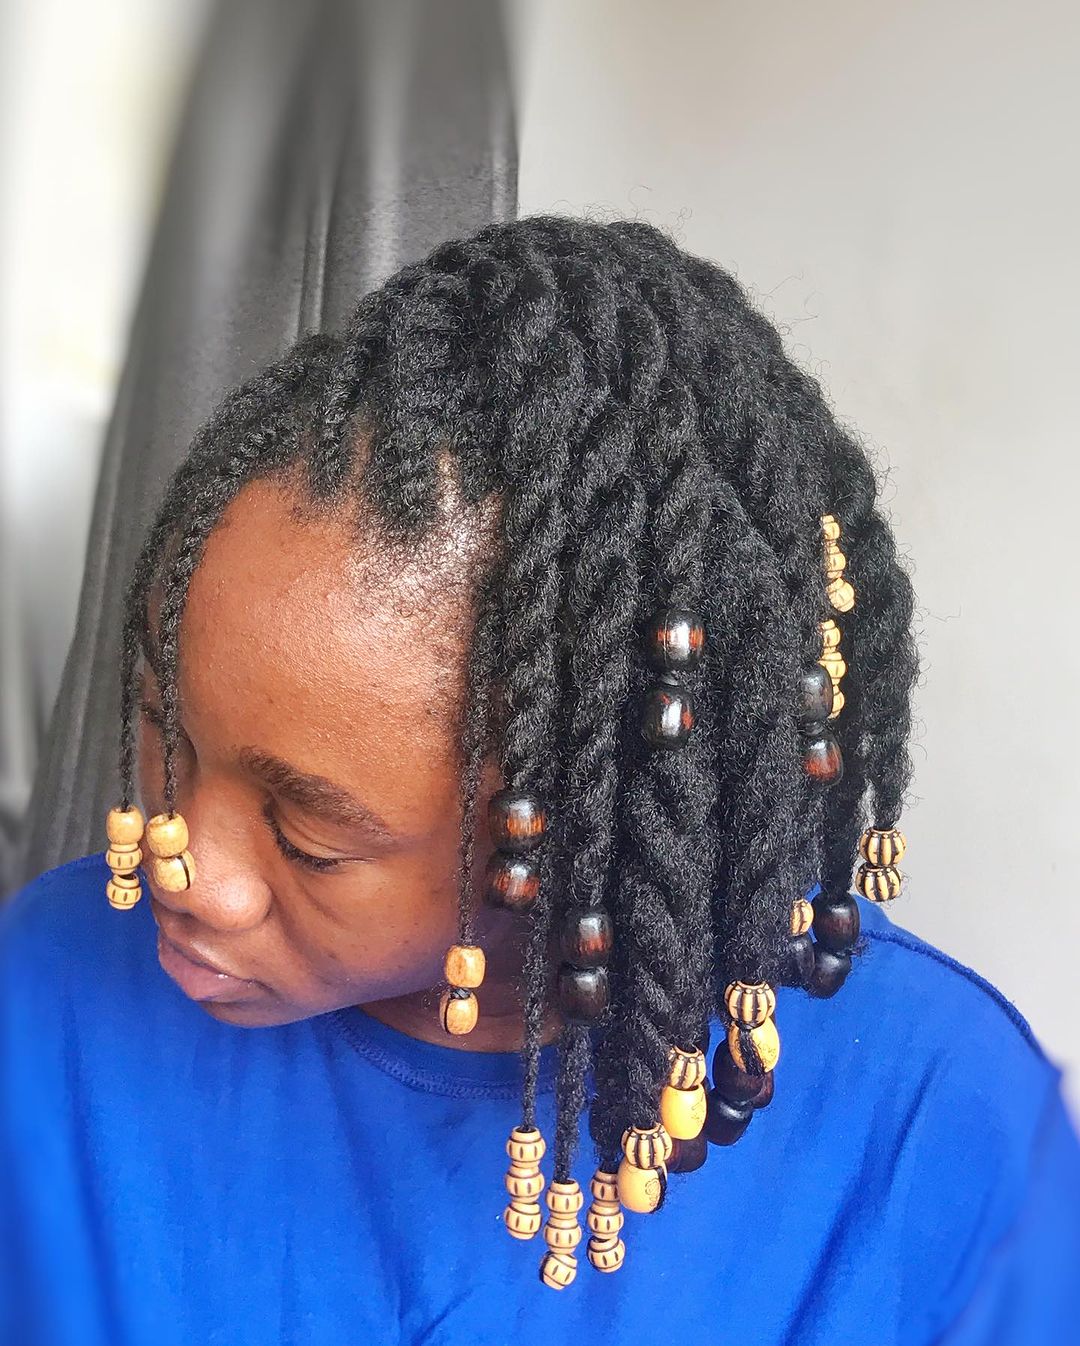 36. Short Twists on Natural Hair With Traditional Beads at The End